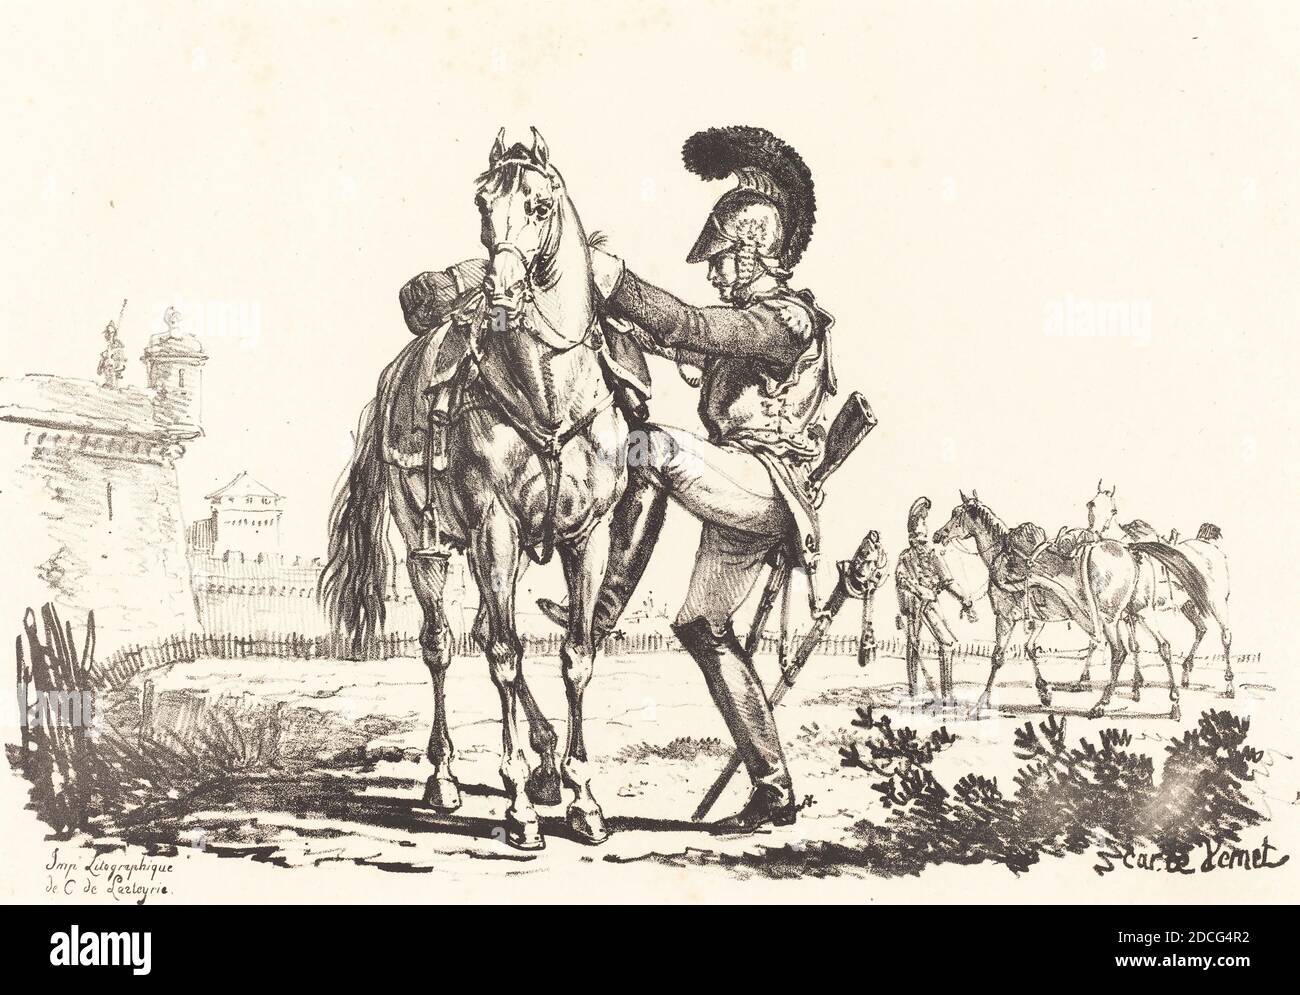 Carle Vernet, (artist), French, 1758 - 1836, Carabinier Mounting a Horse, lithograph Stock Photo